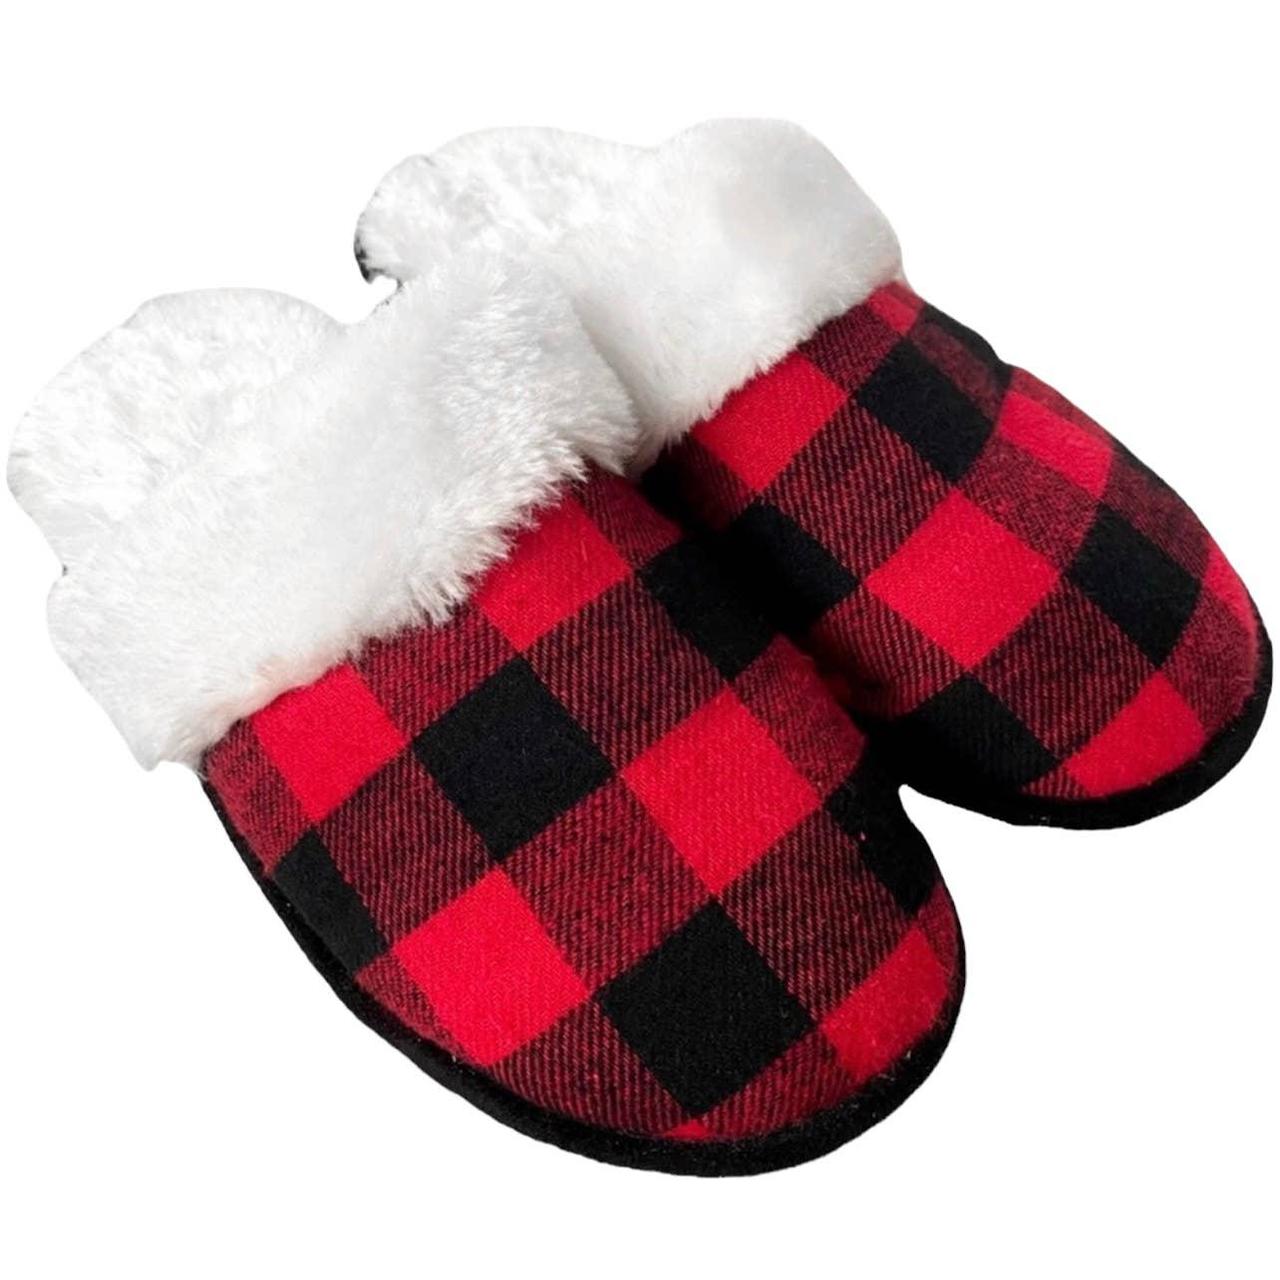 These Ultra-Cozy Slippers Are Up to 54% Off at Amazon